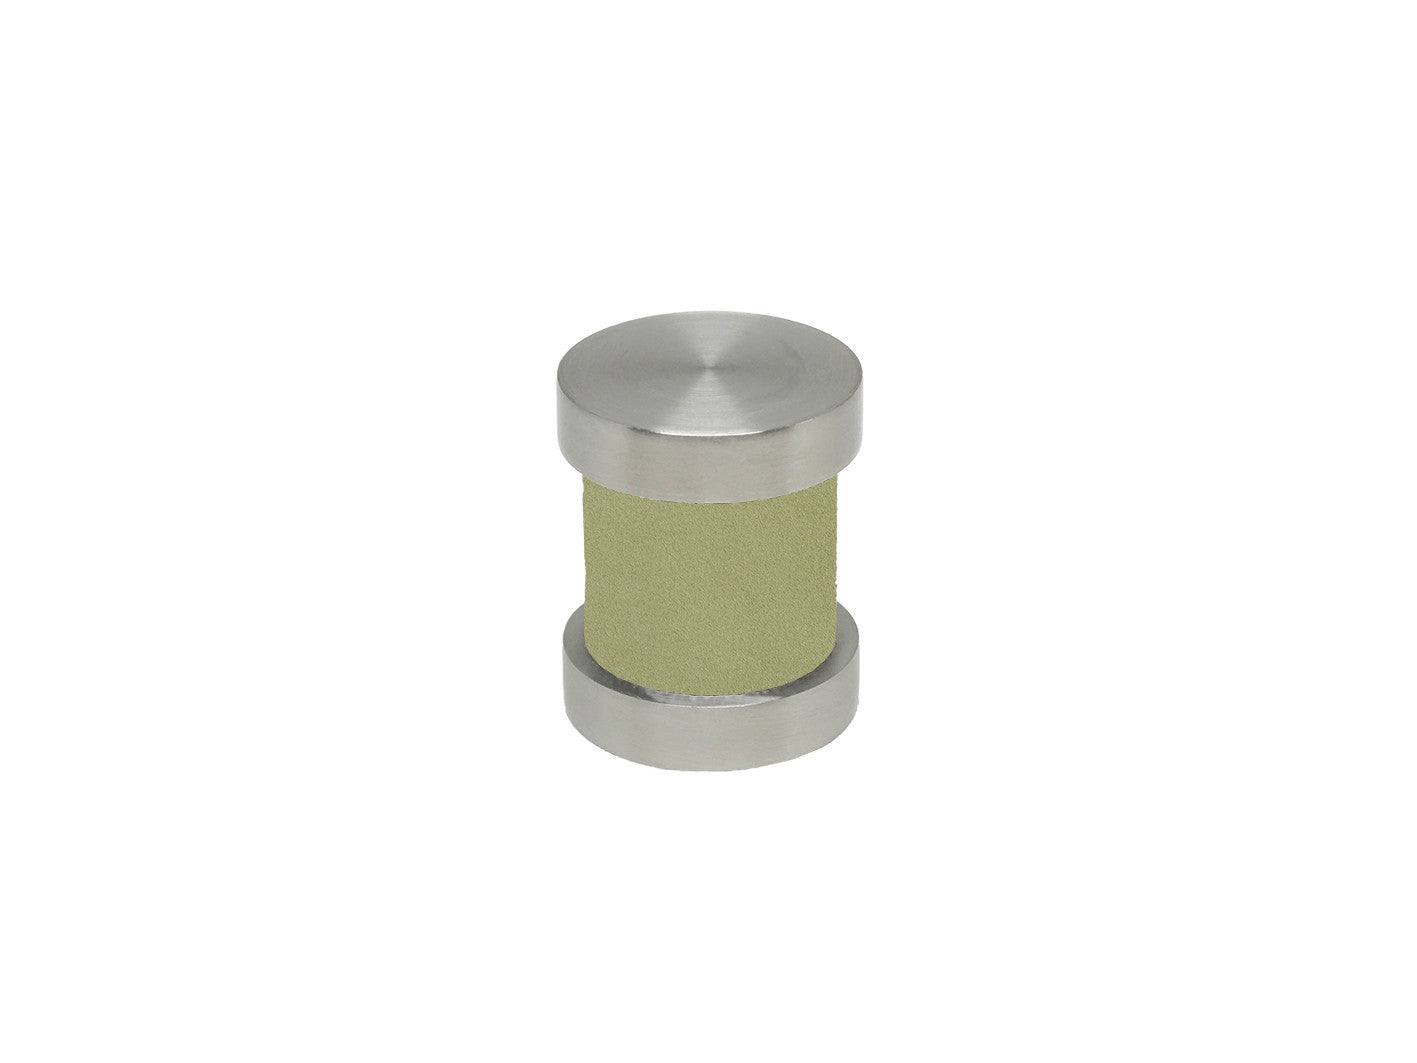 New acorn green groove finial | Walcot House 30mm stainless steel collection